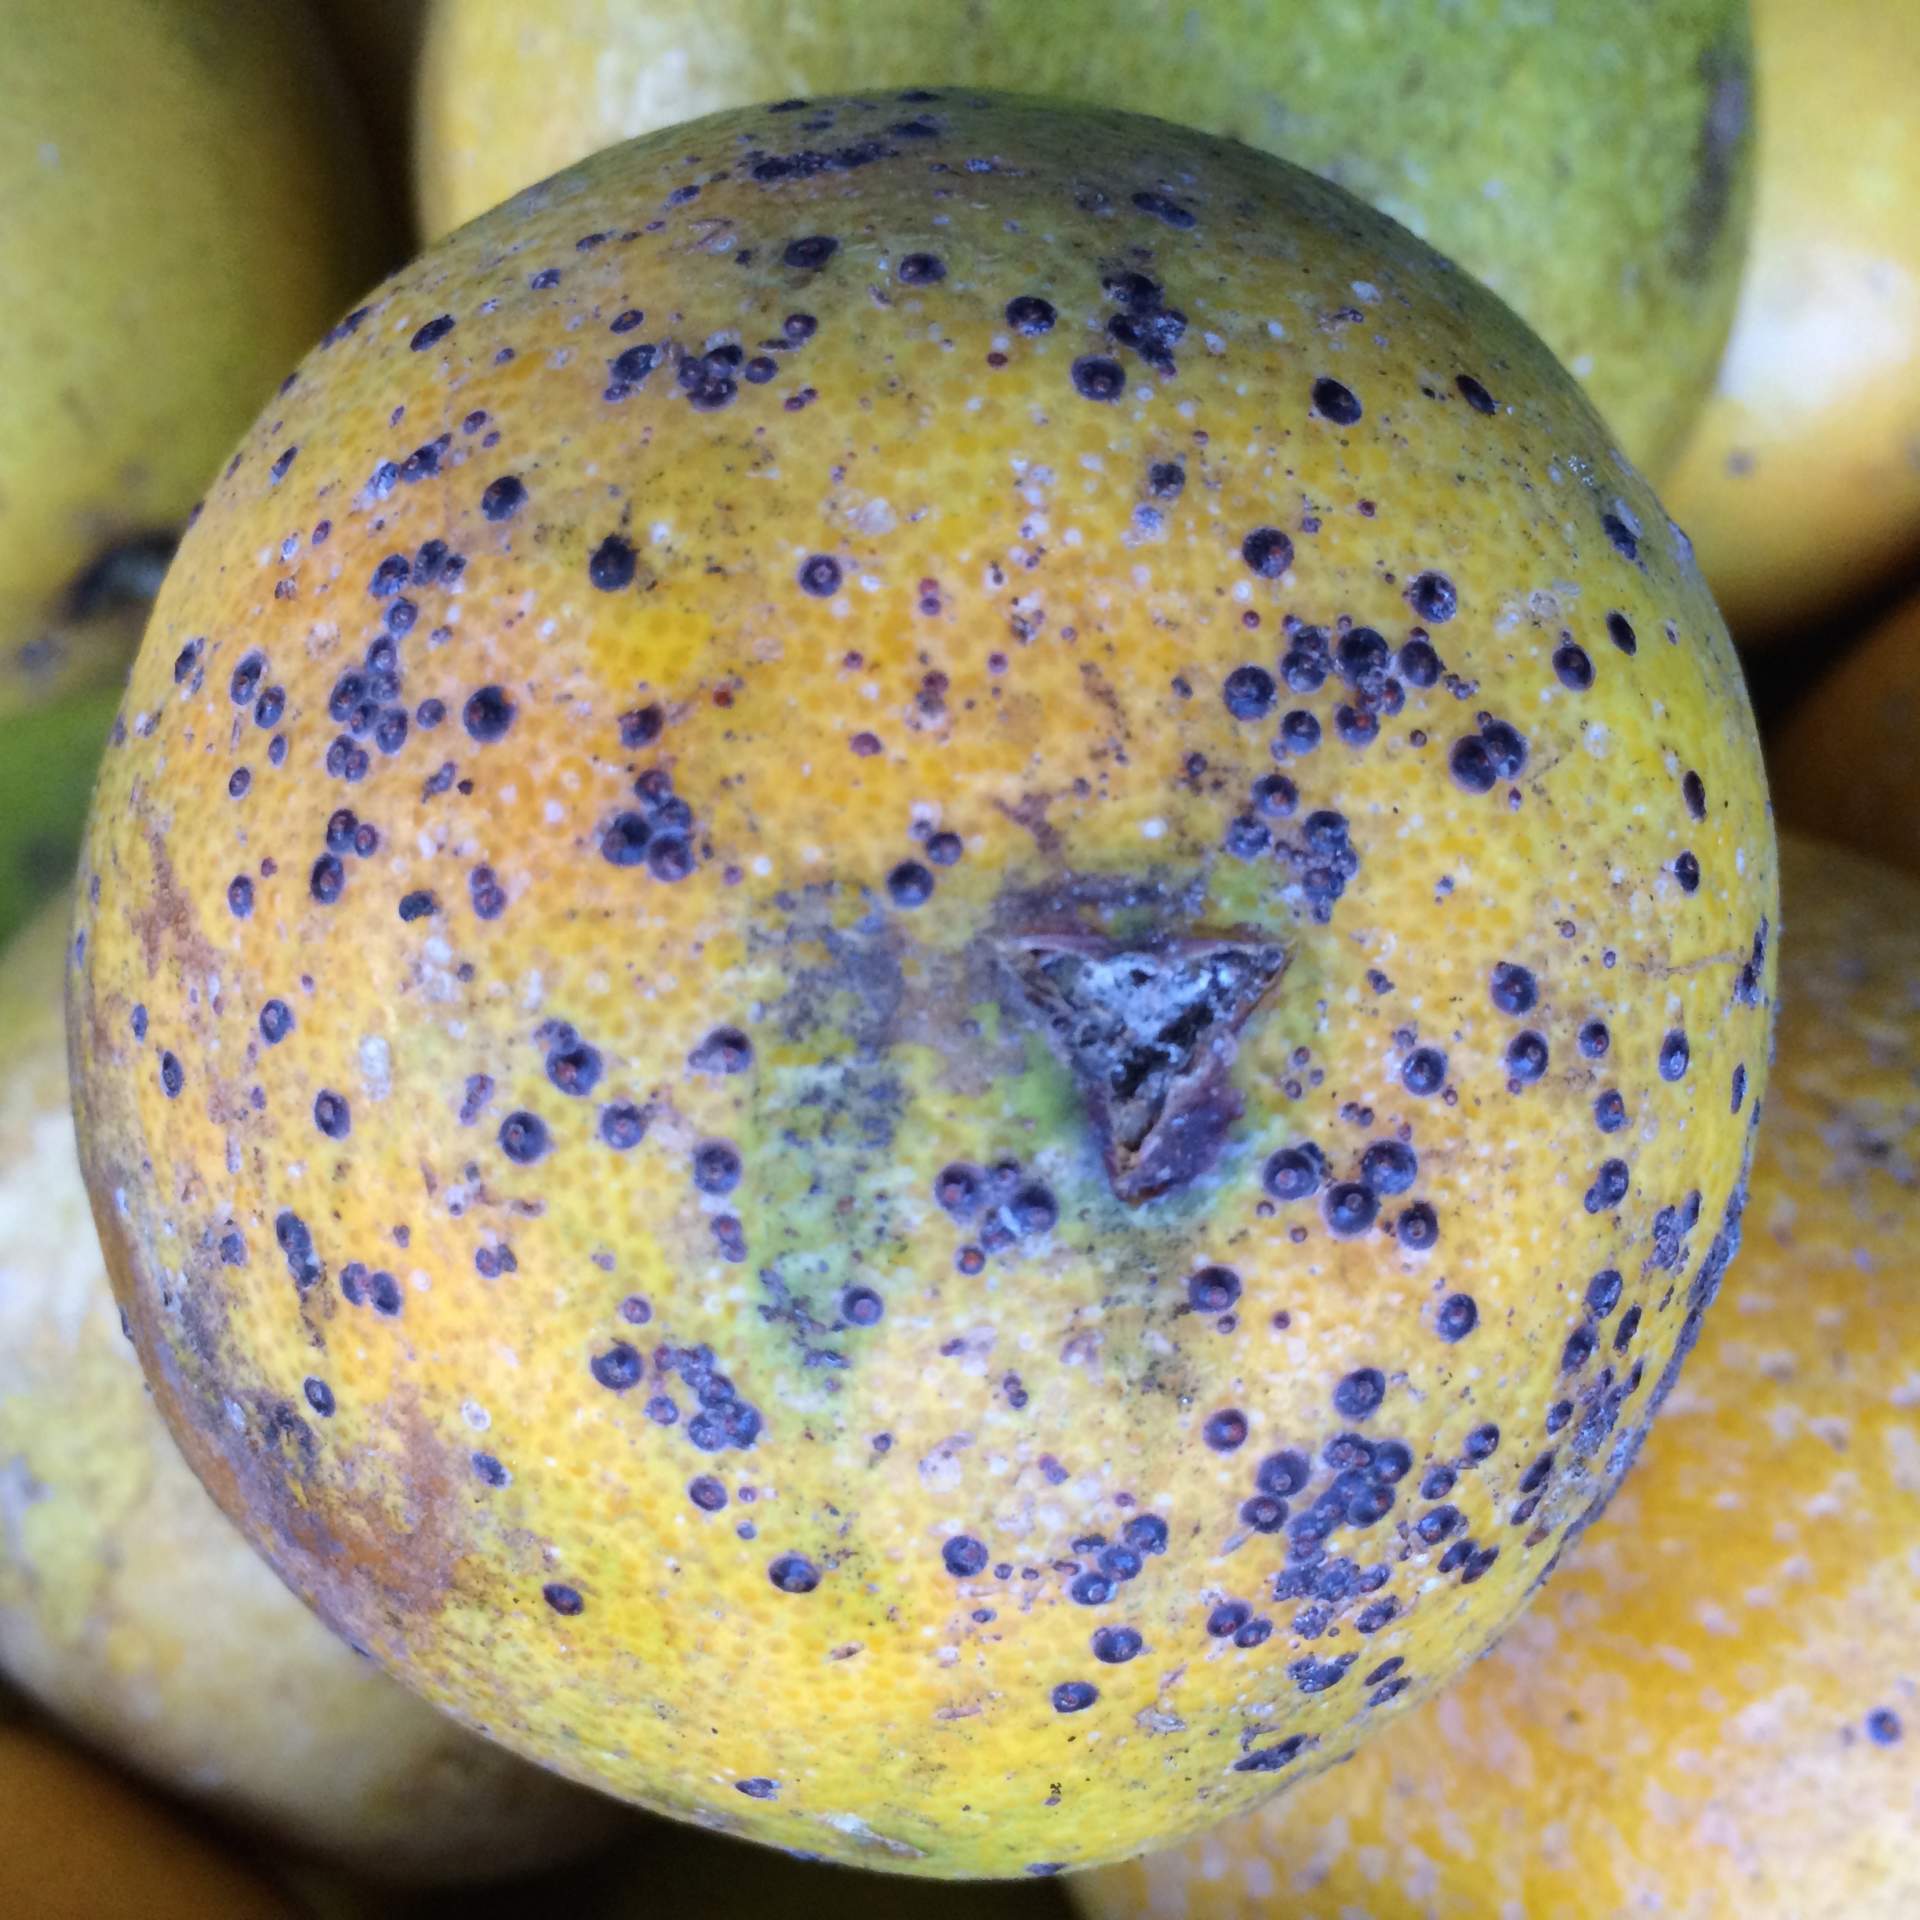 scale insects on citrus